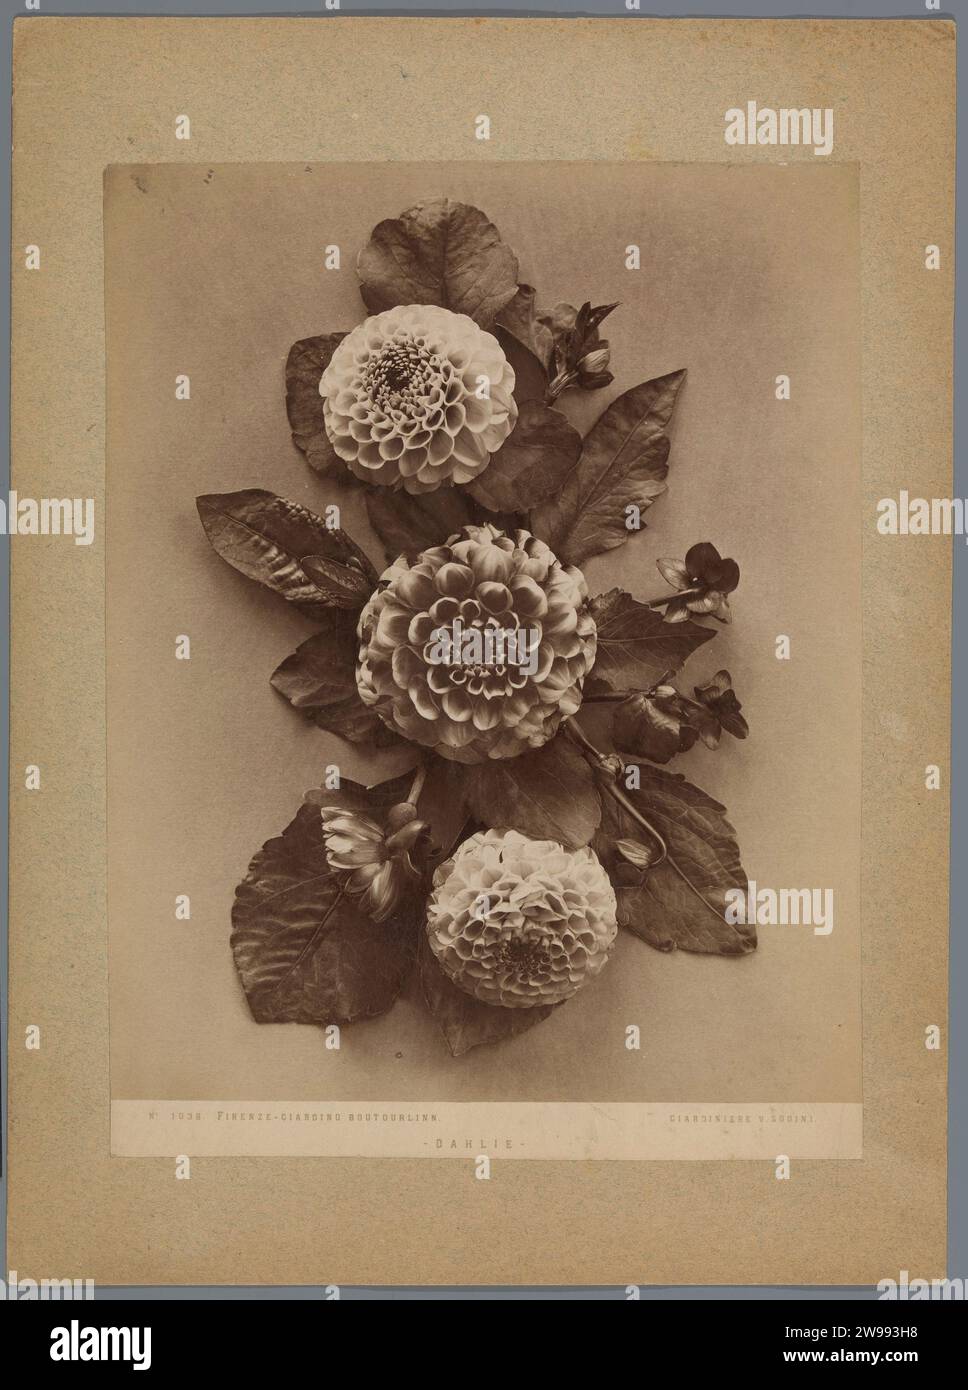 Dahlia's, c. 1875 - c. 1900 photograph  Florence cardboard. photographic support albumen print cut flowers; nosegay, bunch of flowers Florence Stock Photo